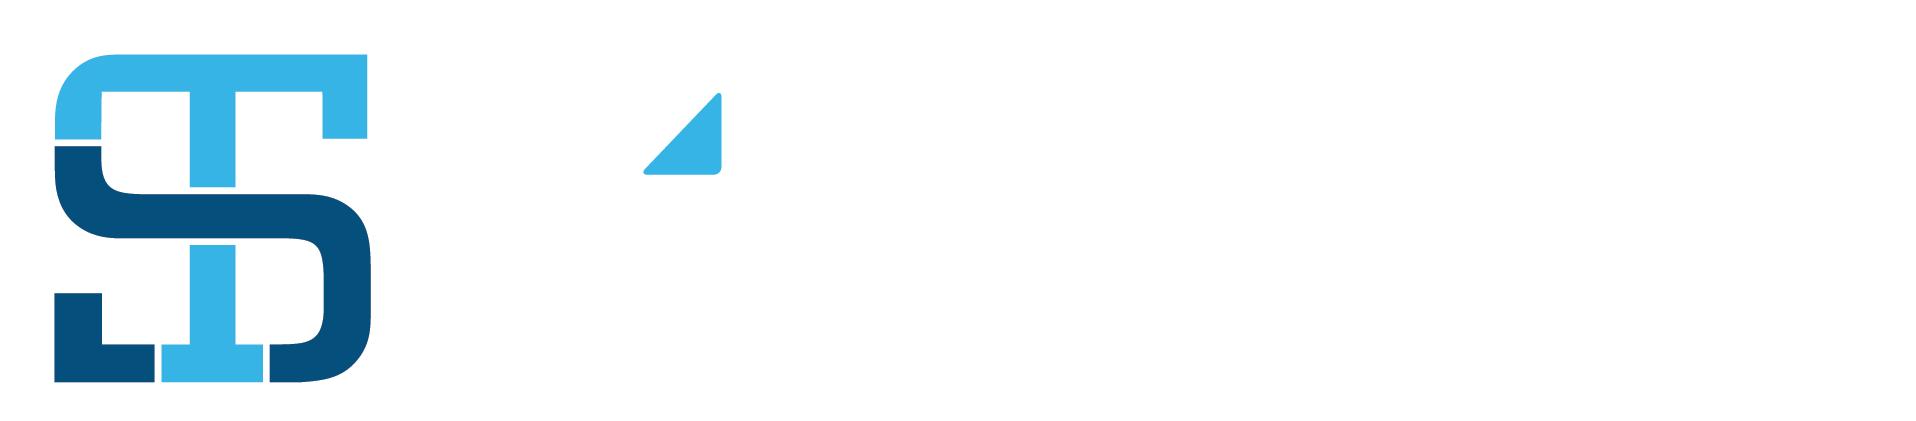 Southeast Technical College logo and monogram